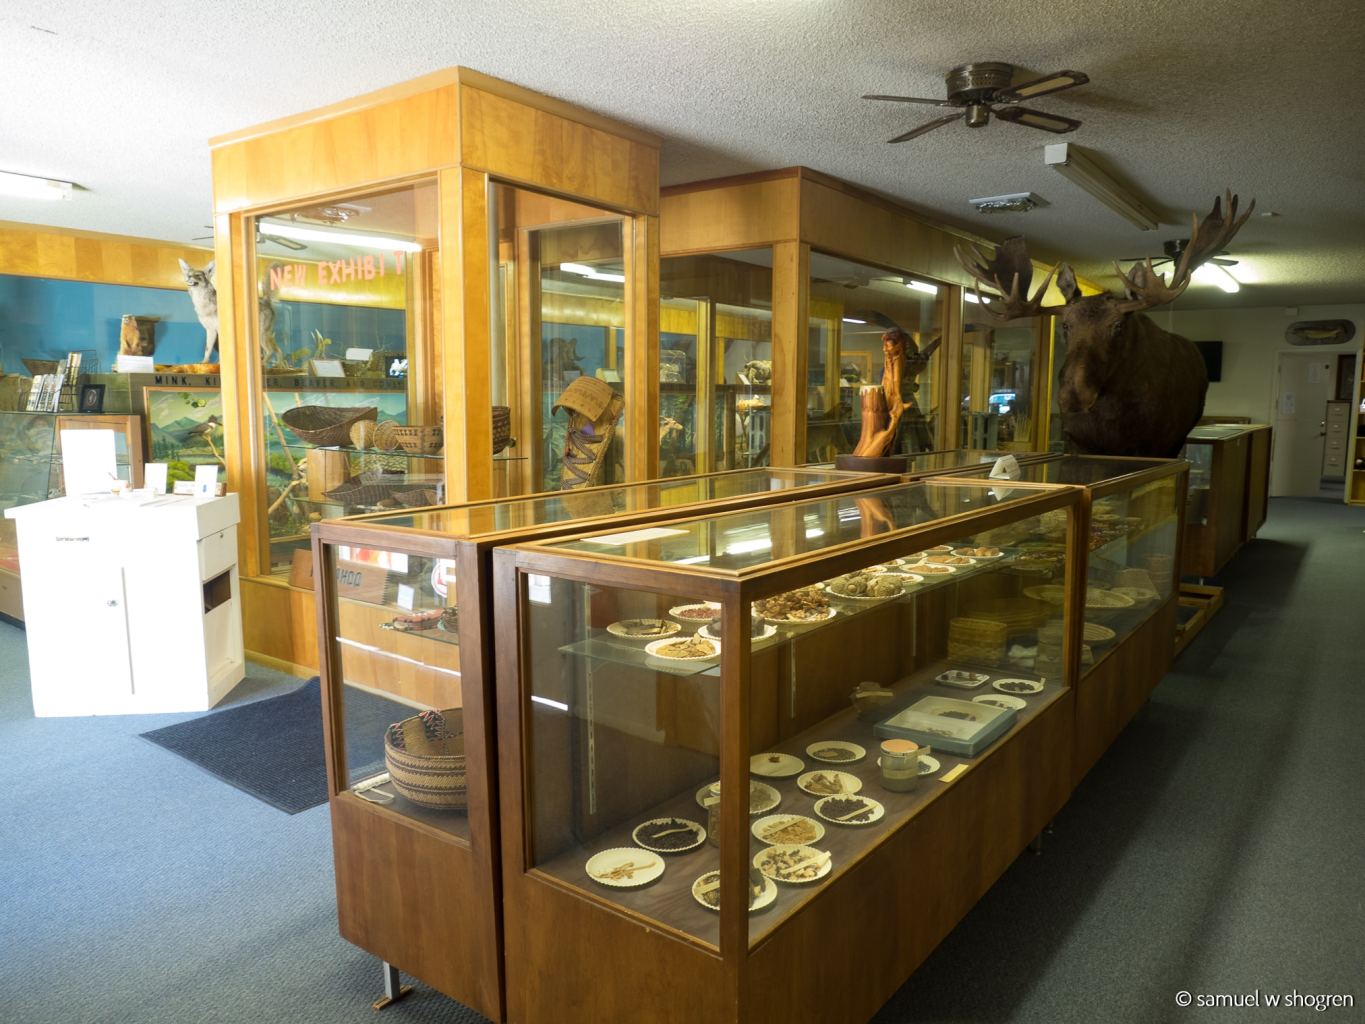 An interior of the museum with art and artifacts on display in glass cases.